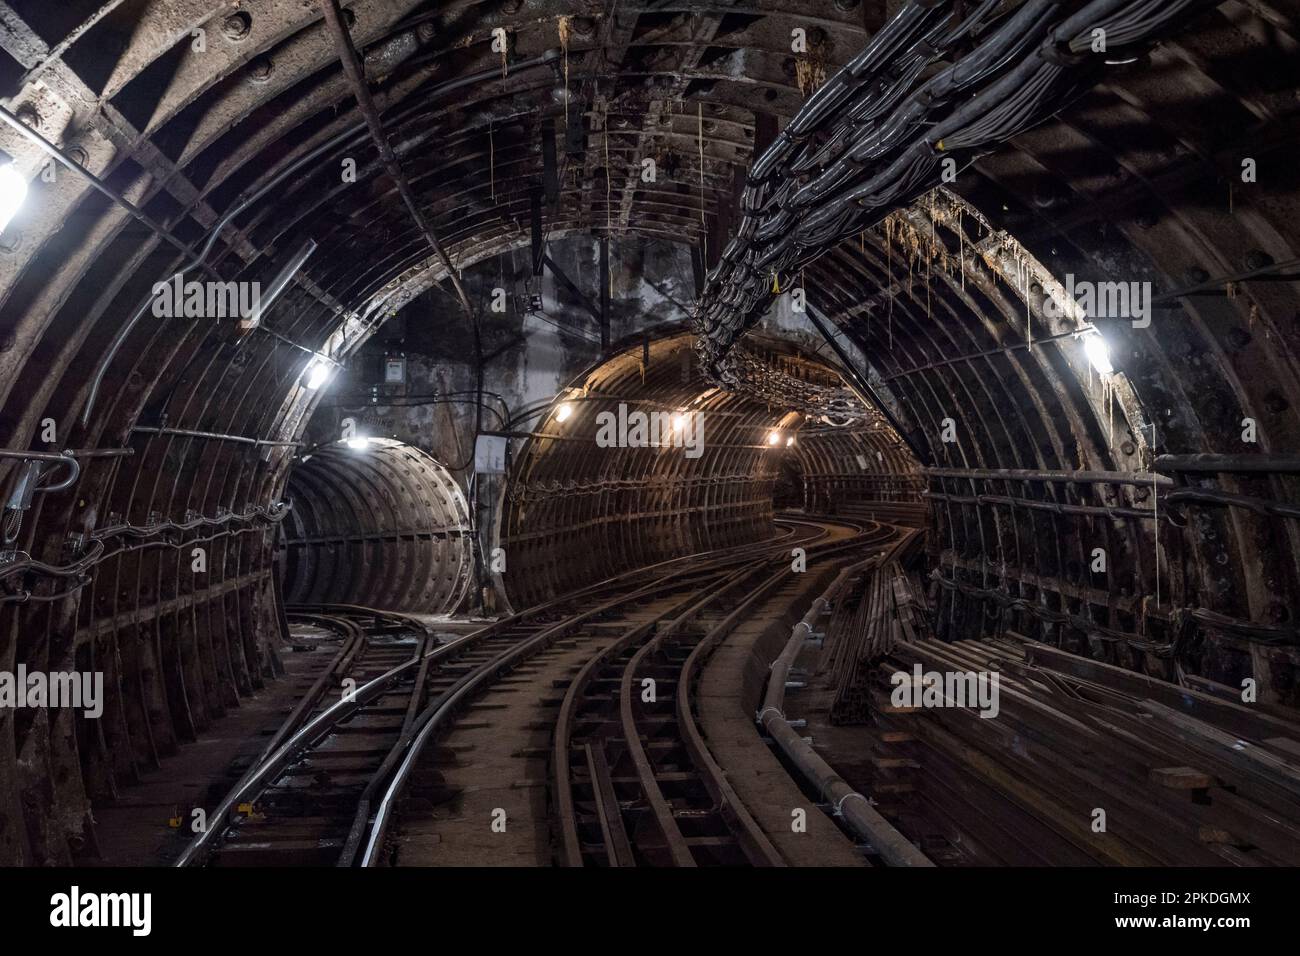 General view of tunnel junction of Mail Rail, the former  Post Office Railway system under the streets of central London, England. Stock Photo